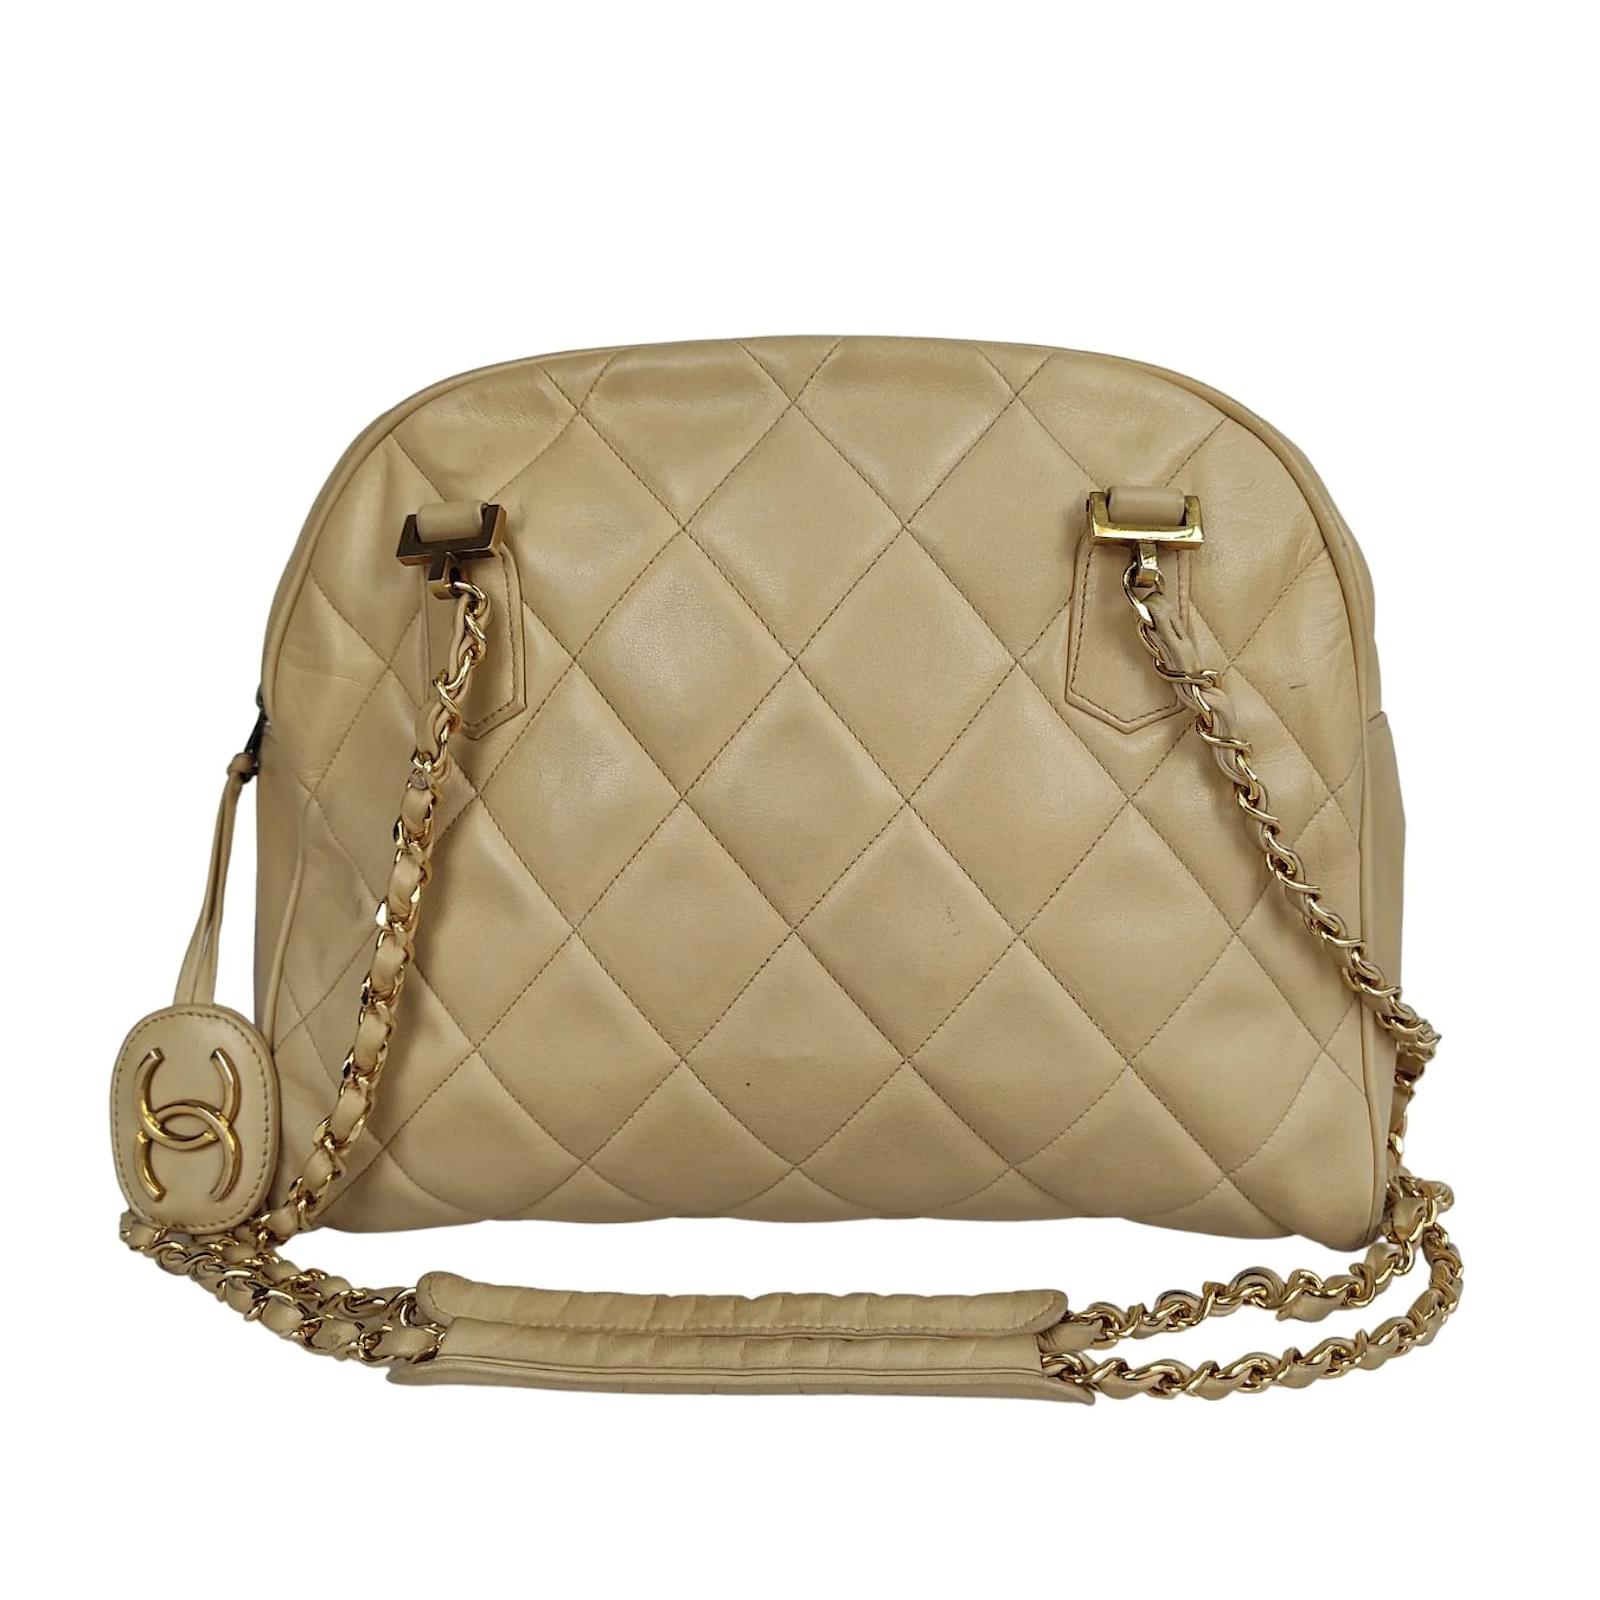 Chanel Chanel shoulder bag in beige matelassé leather from the 80S